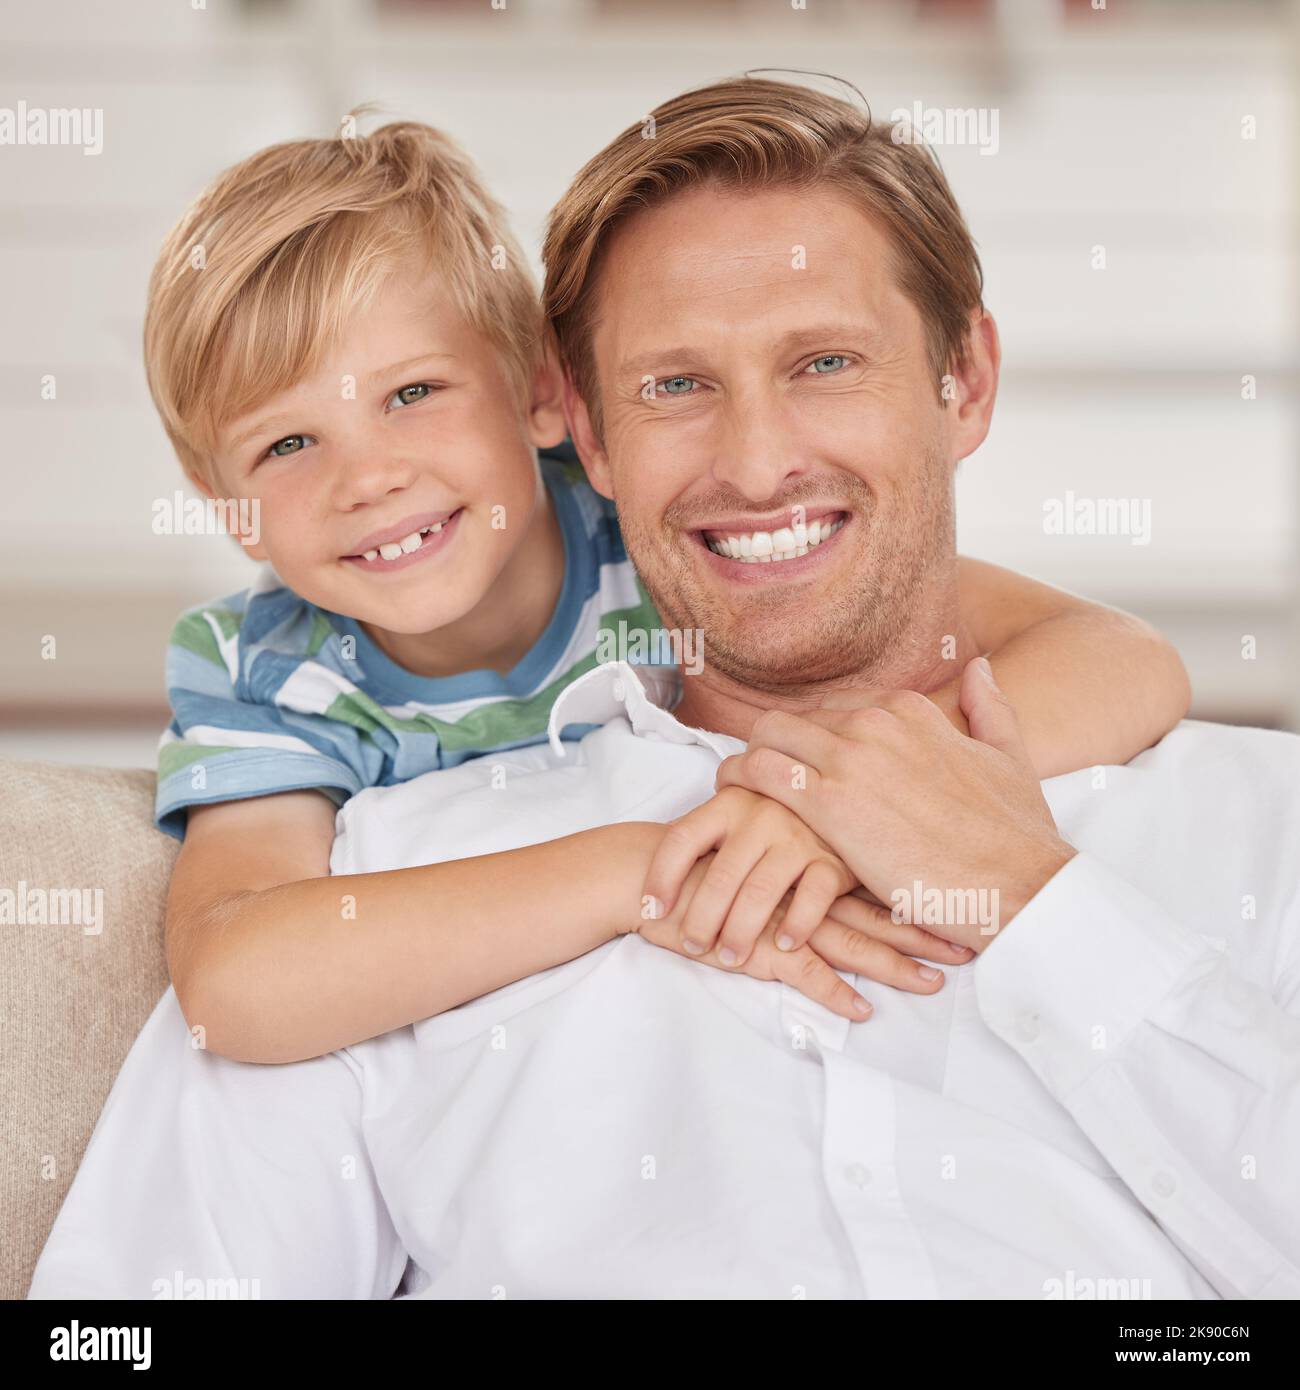 Family, love and portrait of father with son sitting on the sofa, smile of faces. Happiness, affection and child bonding with single dad in family Stock Photo